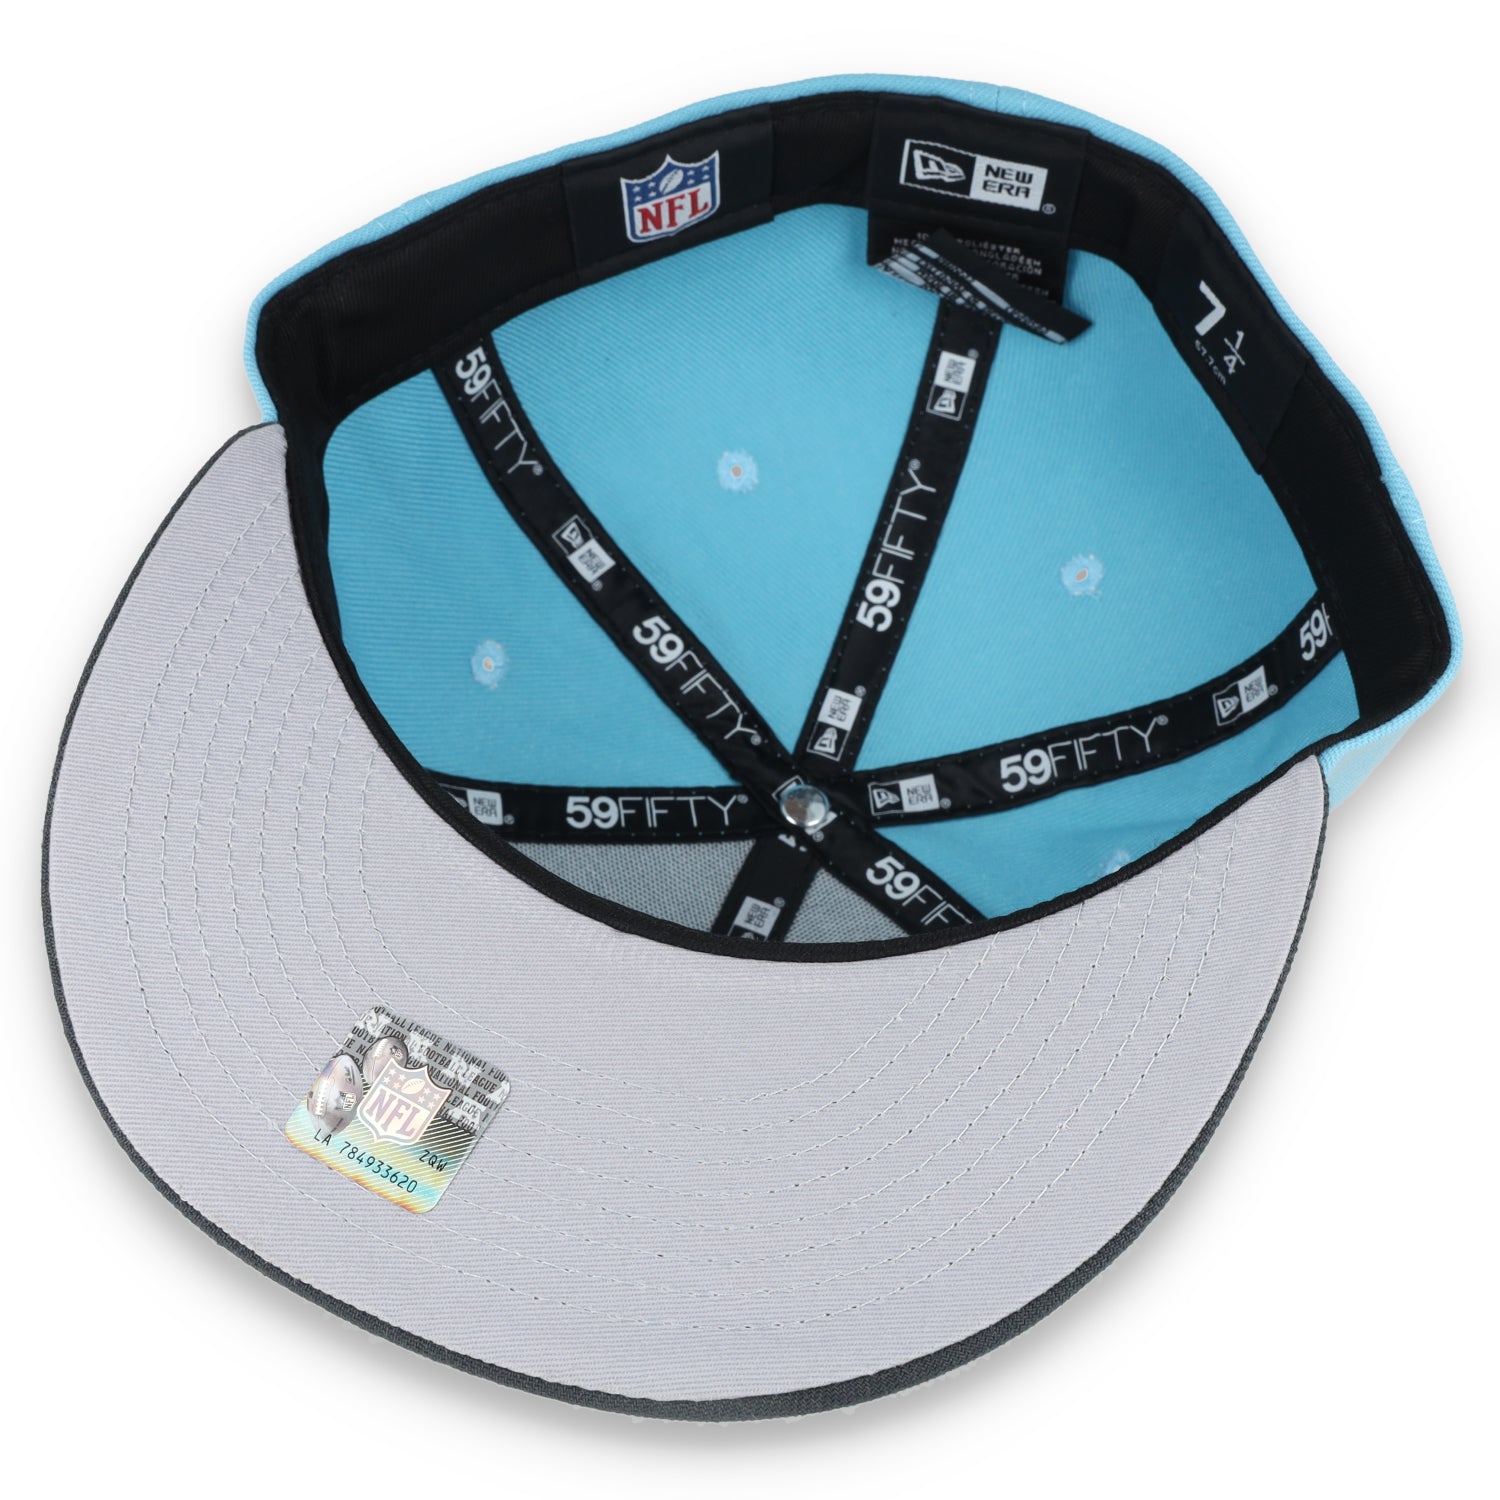 NEW ERA SAN FRANCISCO 49ERS 59FIFTY COLOR PACK-BABY BLUE/GREY